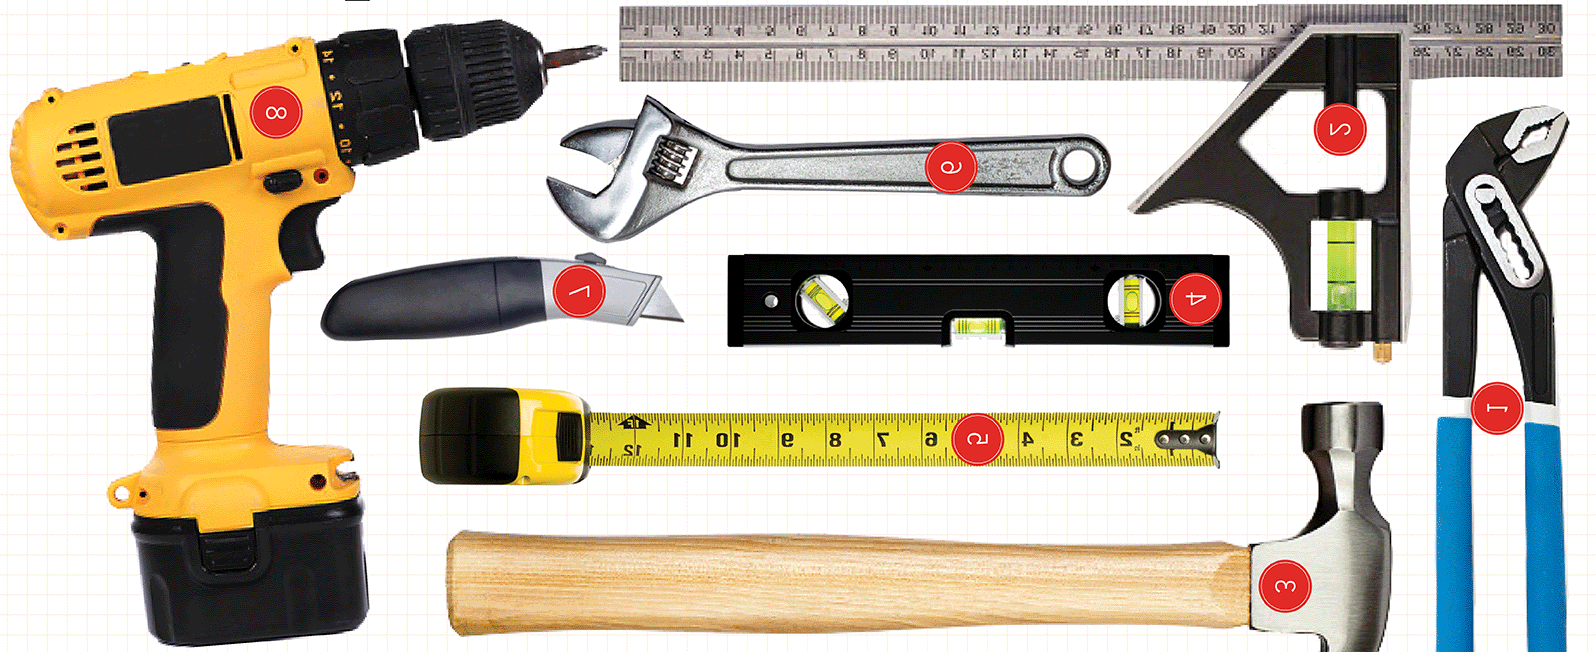 must-have-tools-for-every-homeowner-image